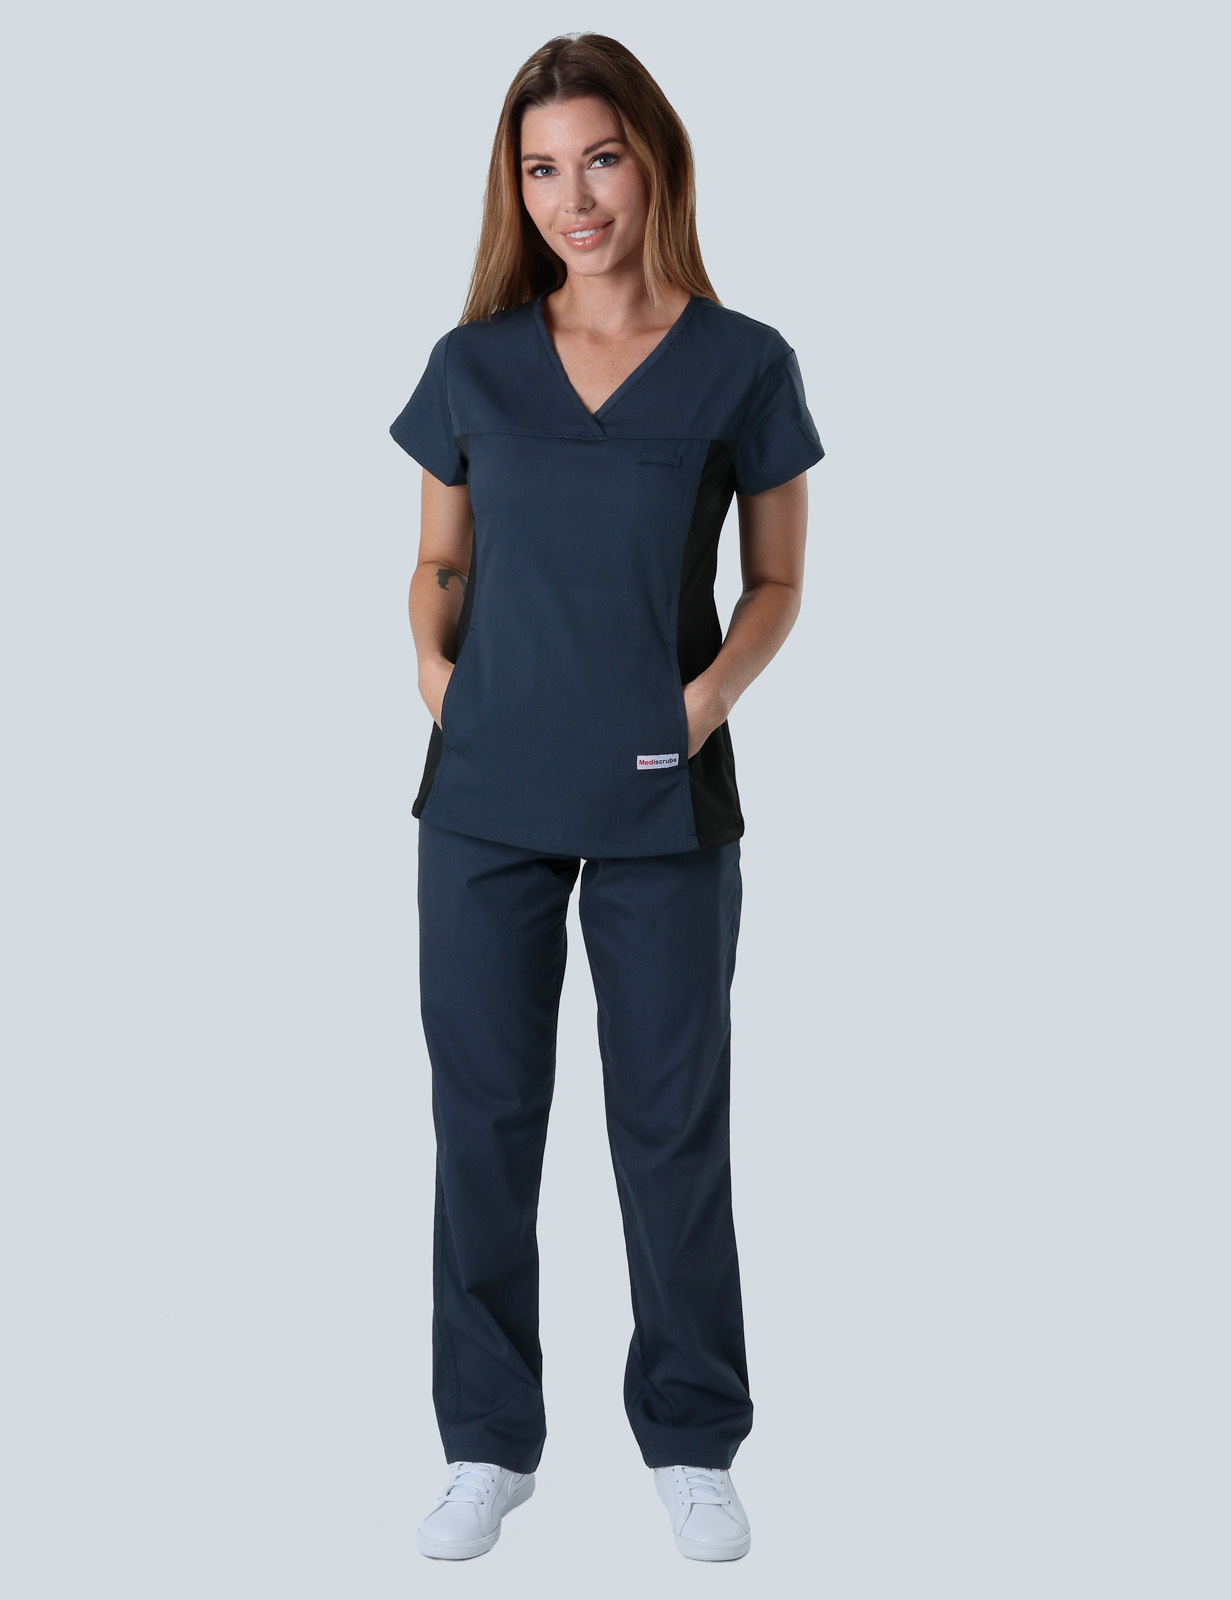 Women's Fit Solid Scrub Top With Spandex Panel - Navy - 4X large